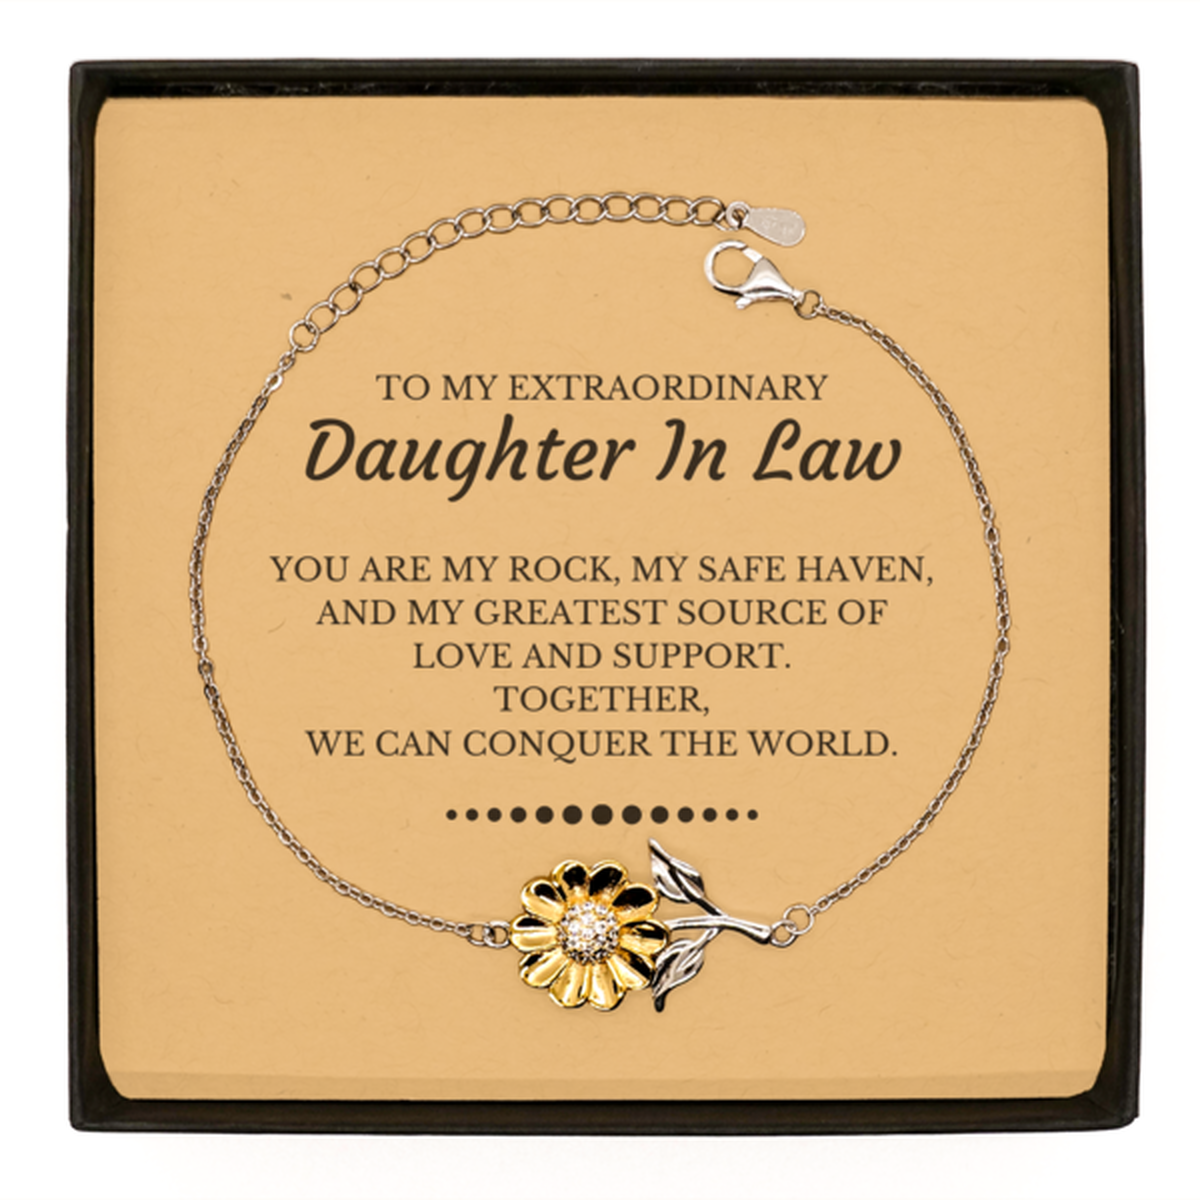 To My Extraordinary Daughter In Law Gifts, Together, we can conquer the world, Birthday Sunflower Bracelet For Daughter In Law, Christmas Gifts For Daughter In Law